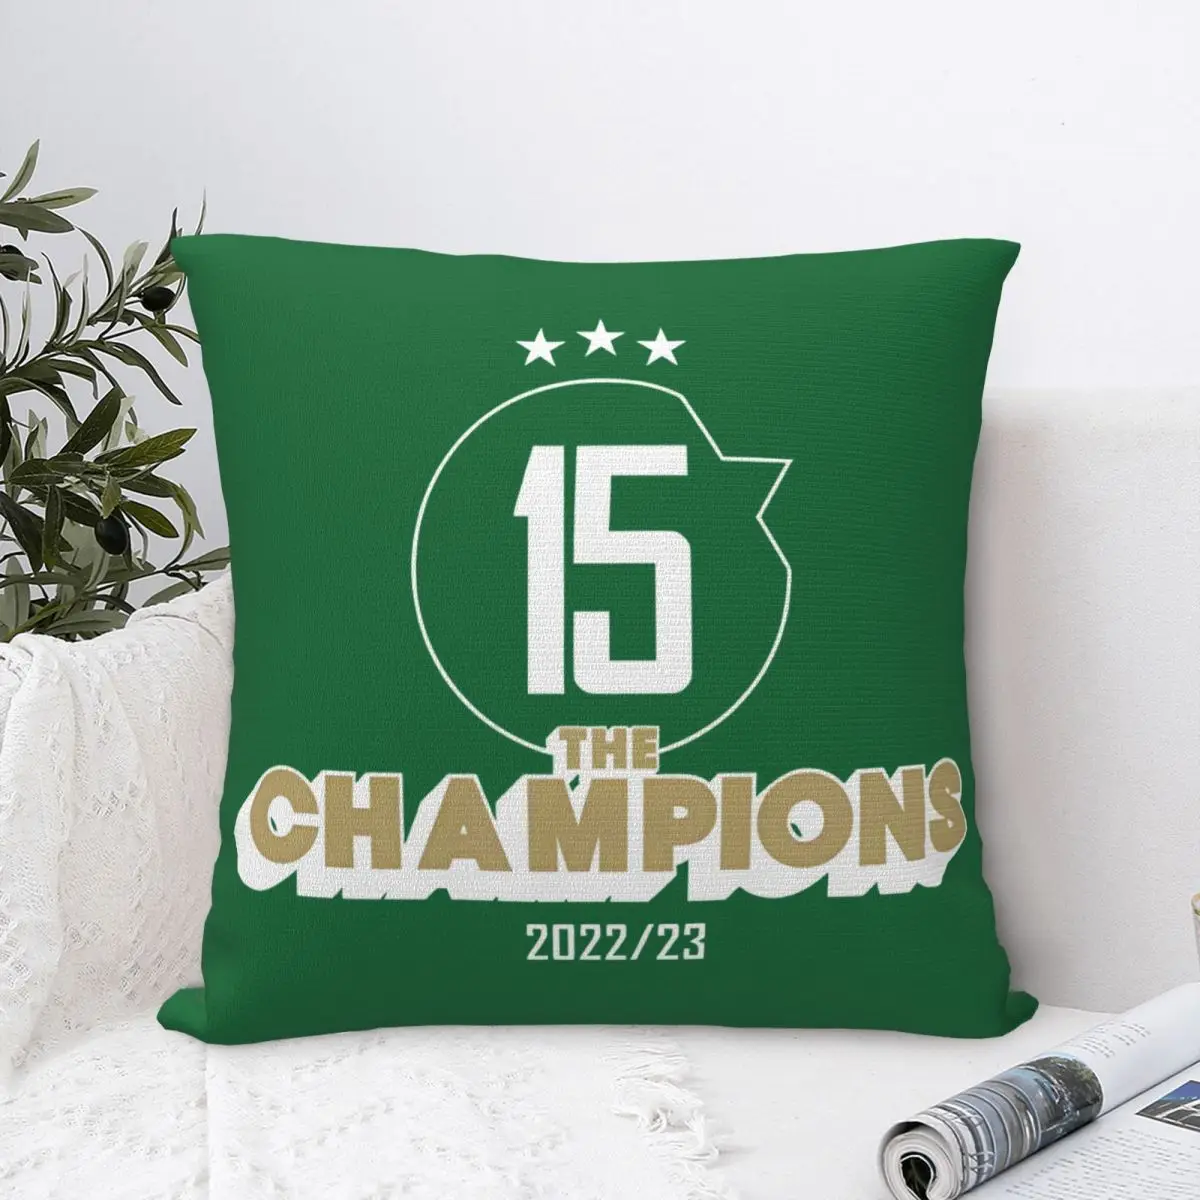 

Israel MHFC Maccabi - Haifa Square Throw Pillow Case Cushion Covers Pillowcase Home Decor for Room Sofa Couch Bed - 2-Pack